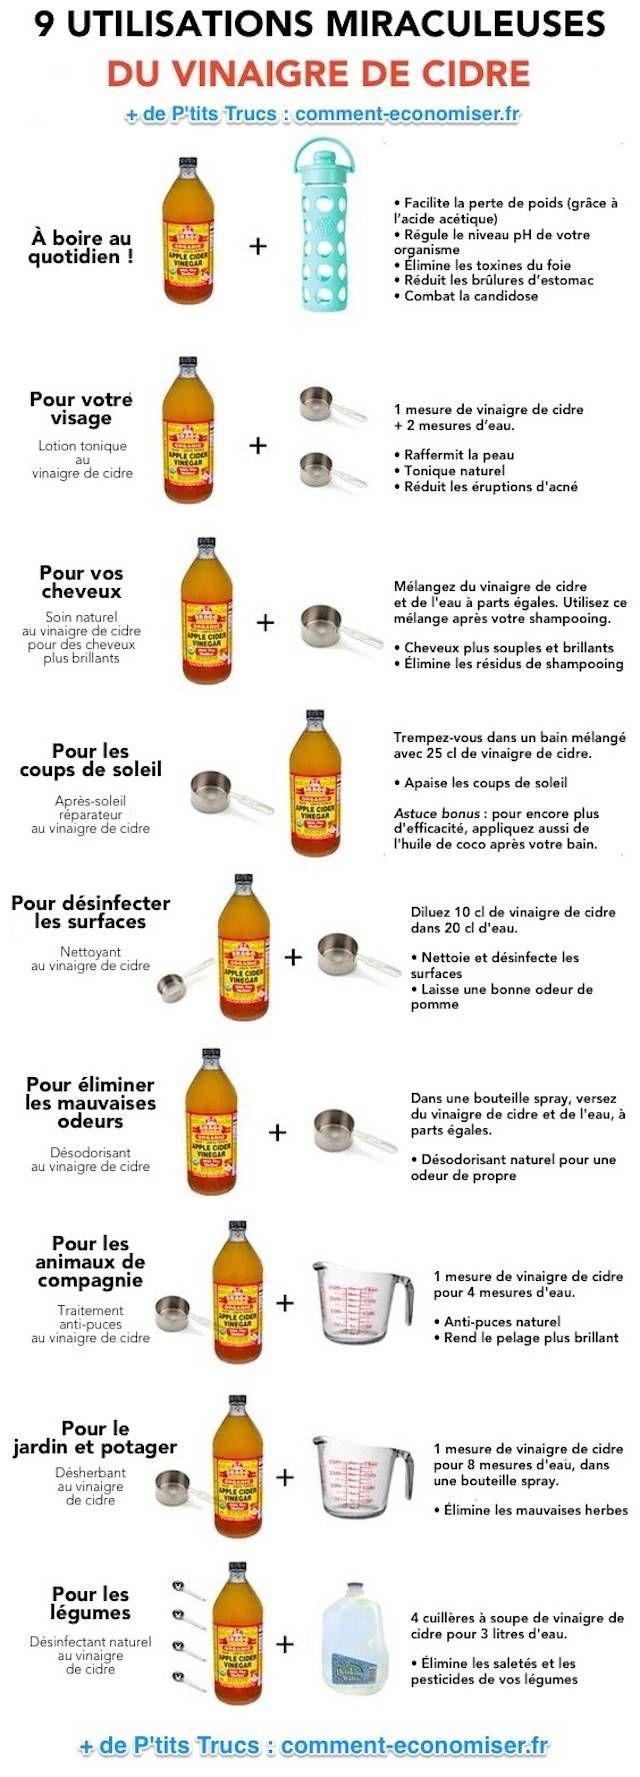 How to use apple cider vinegar to maintain his house? 